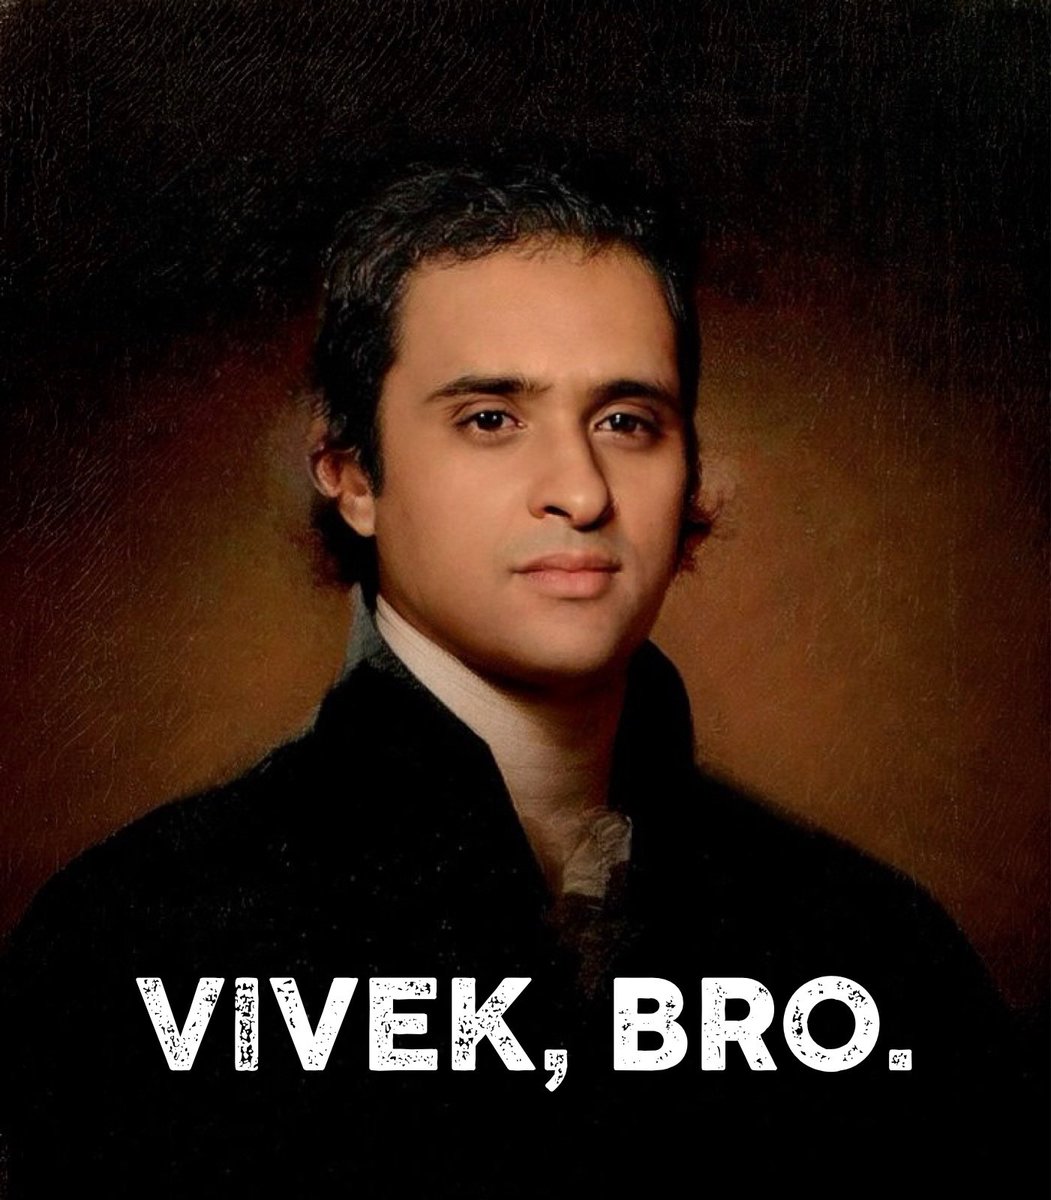 Now more than ever...it's what our country NEEDS. #TrumpVivek2024 #TrumpVivek #VPVivek #Vivek48 🇺🇸